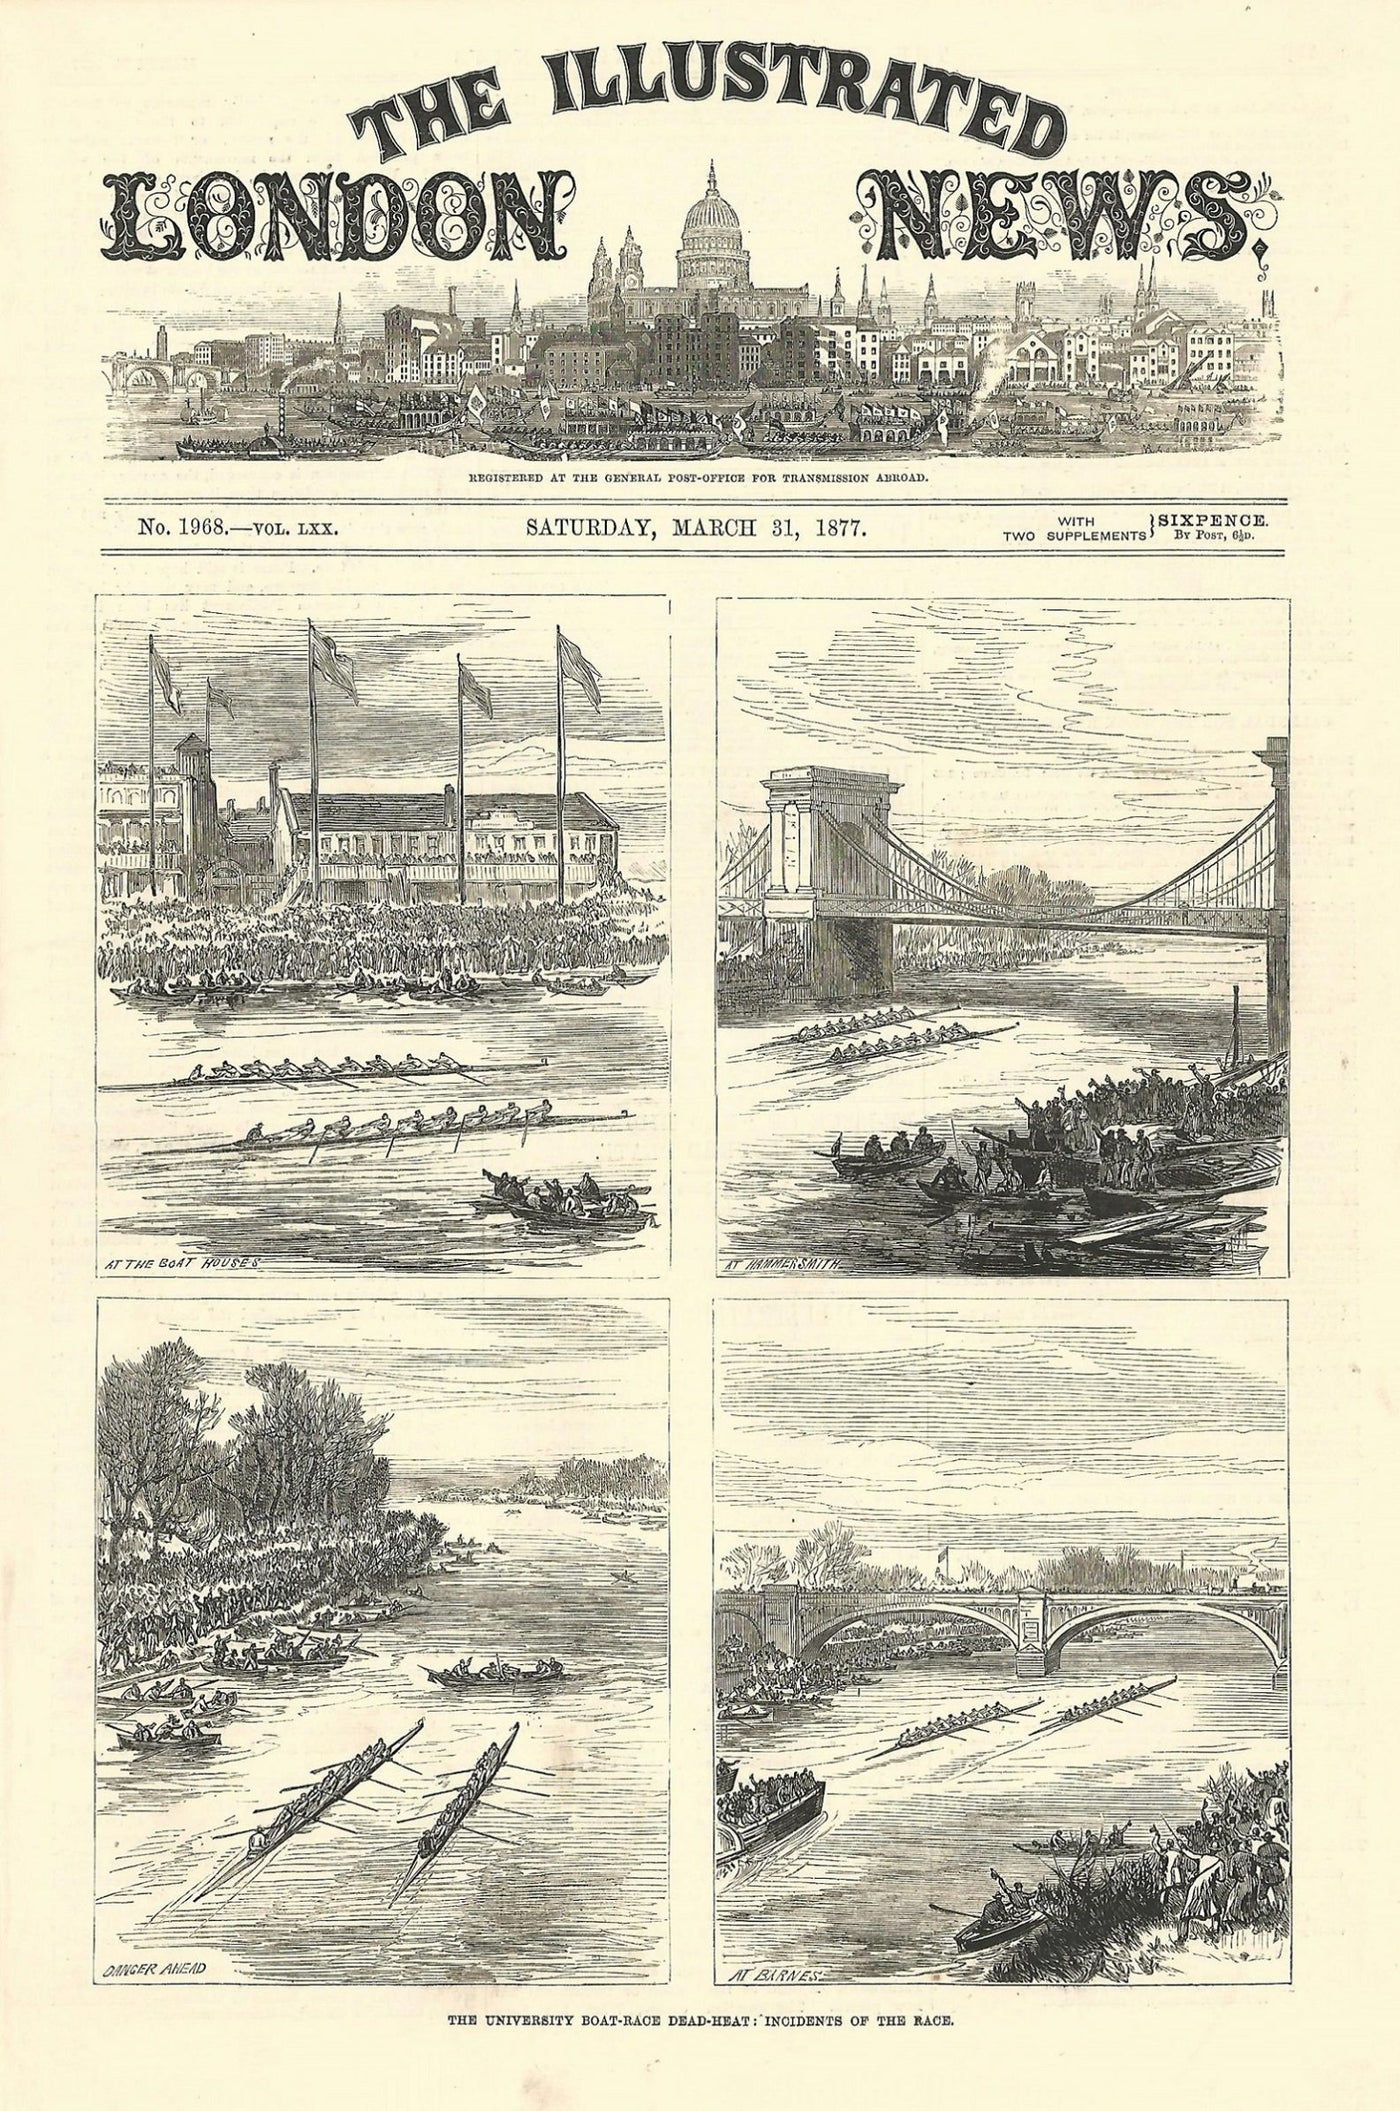 University Boat Race 1877 antique print dated March 1877